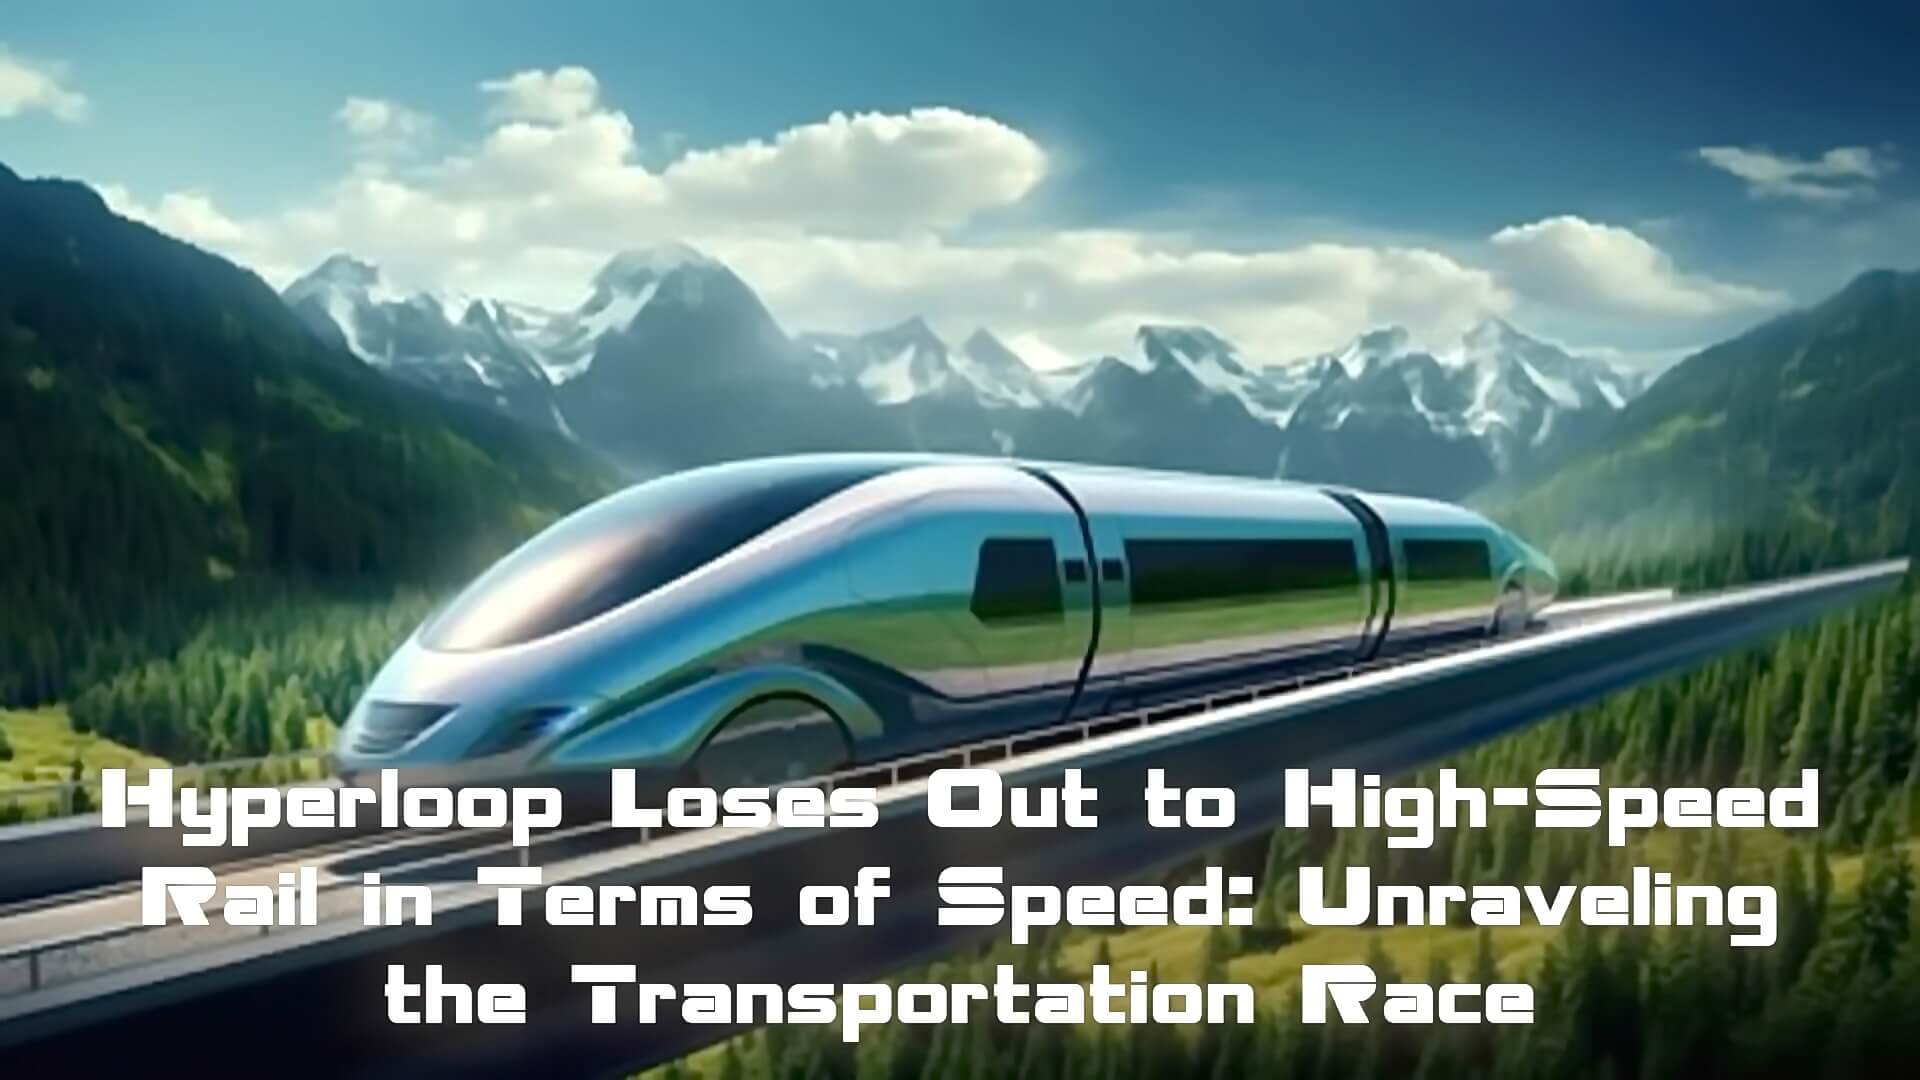 Hyperloop Loses Out to High-Speed Rail in Terms of Speed: Unraveling the Transportation Race